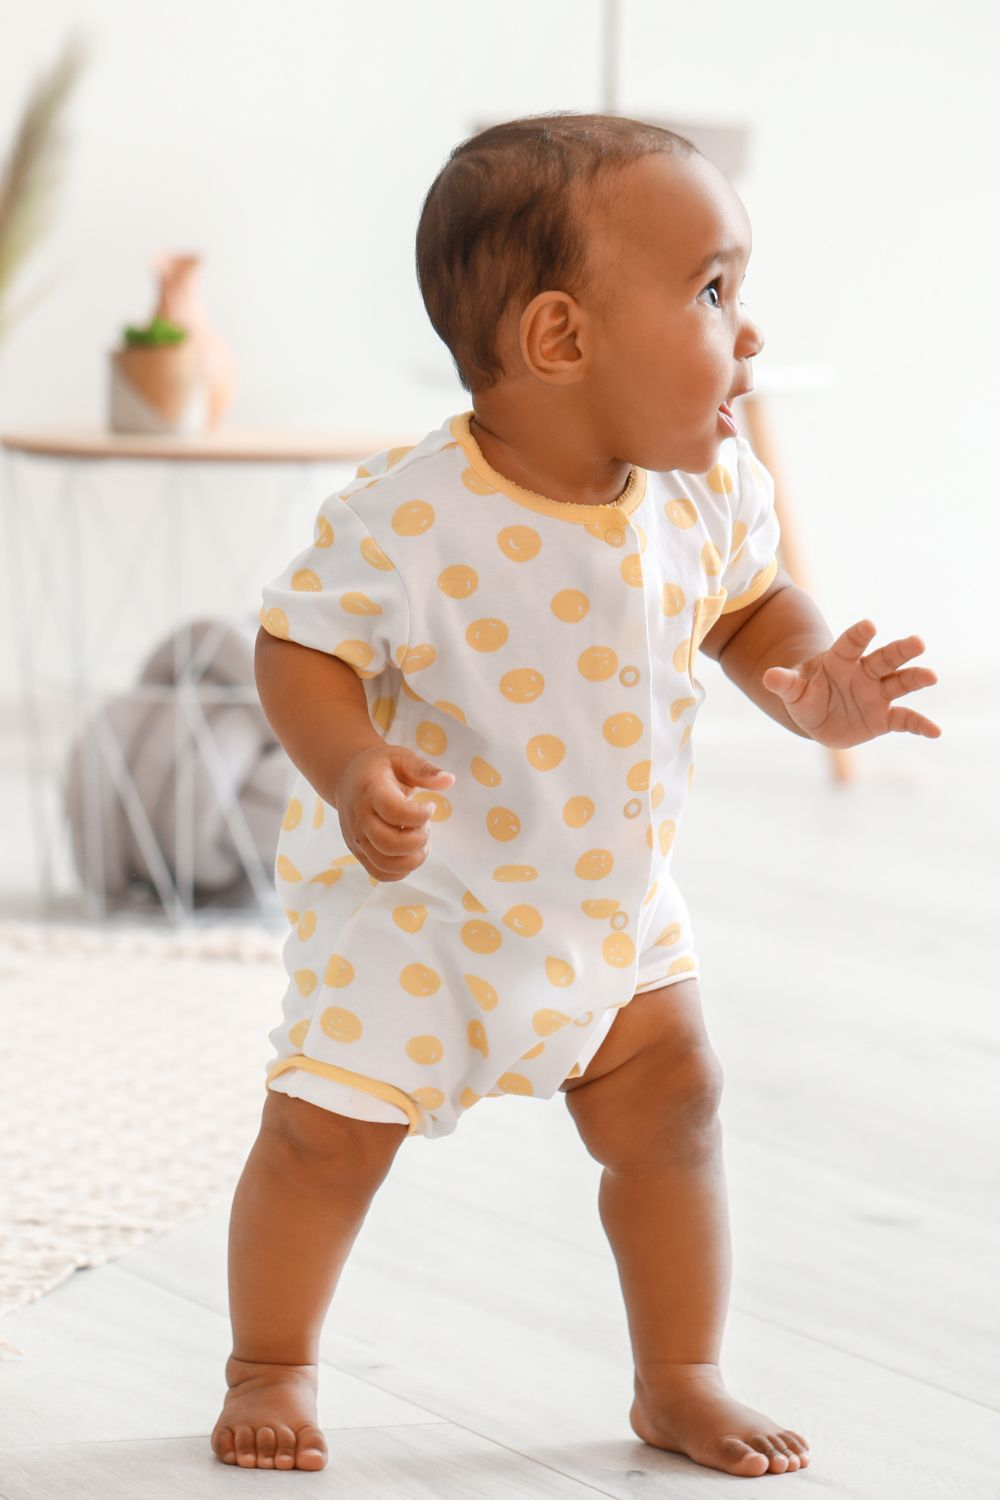 Bbay taking first steps - Featured in What Are The Reasons For Delayed Walking In Babies